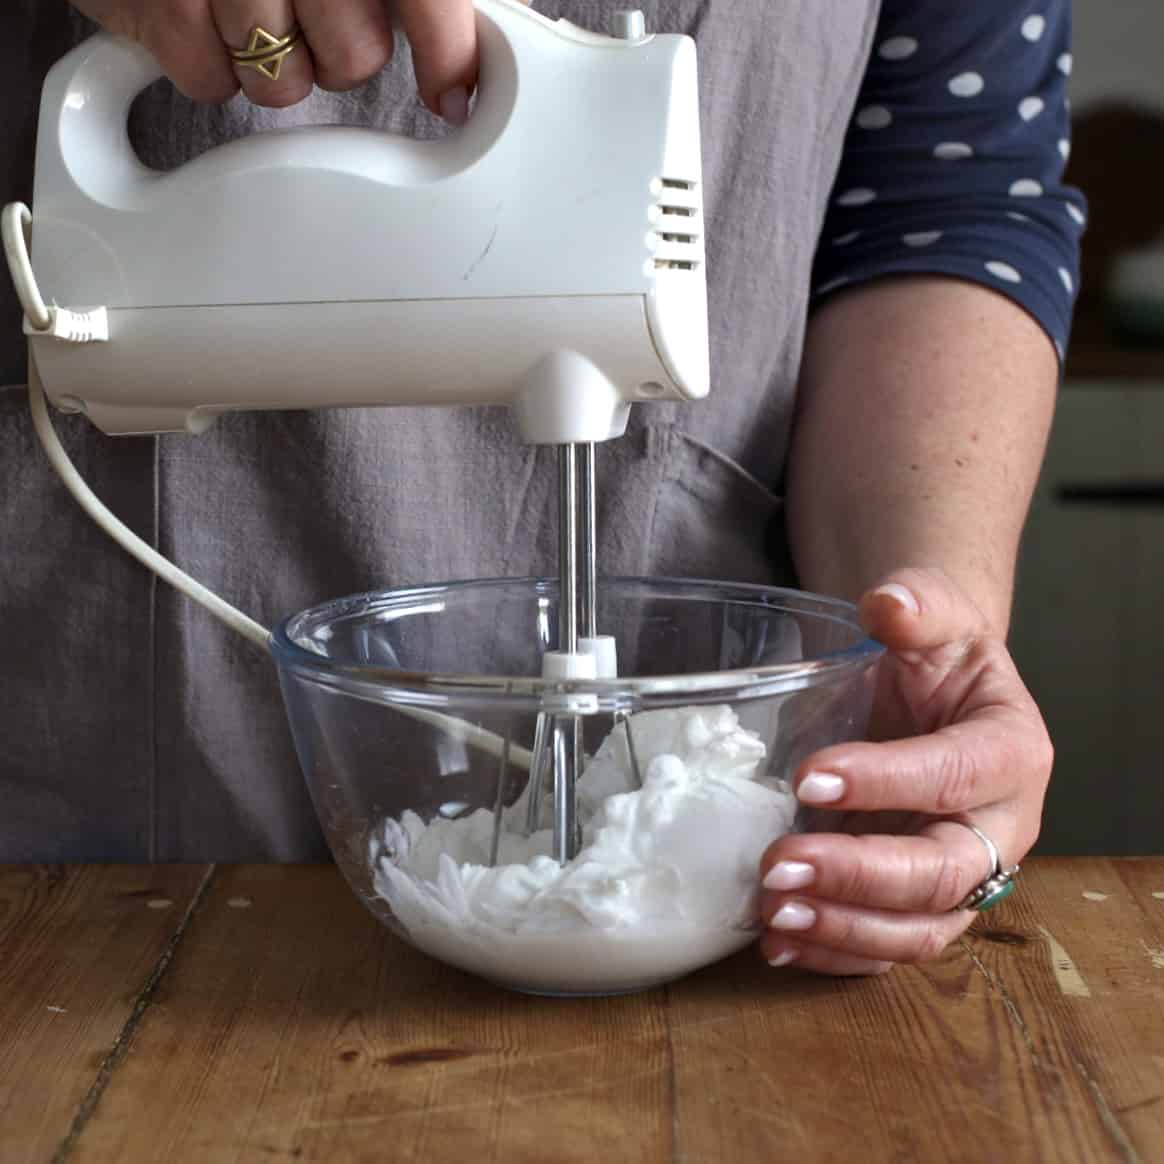 Woman in grey using a white electric whisk to beat canned coconut milk in a glass mixing bowl